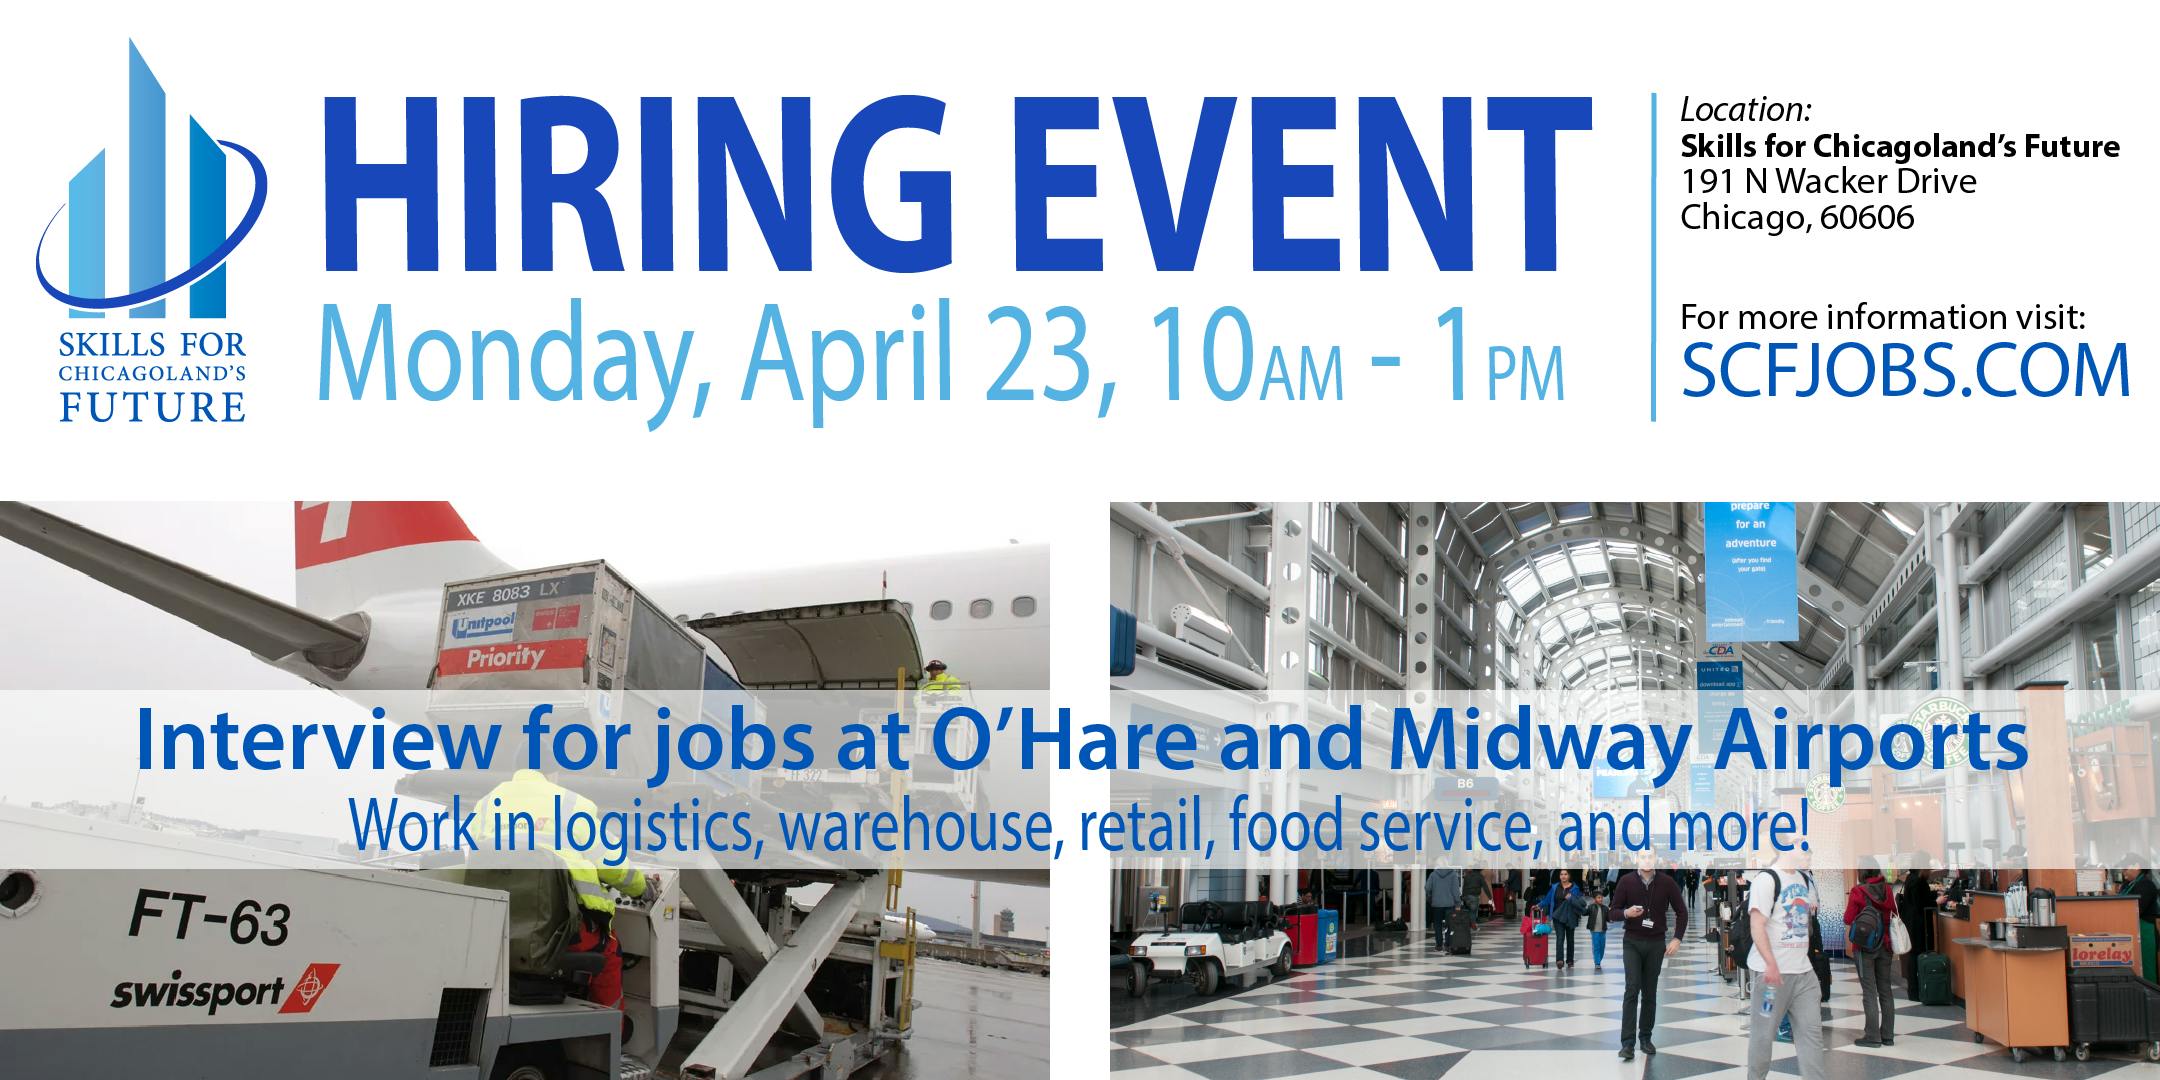 Hiring Event for Jobs at O'Hare and Midway Airports